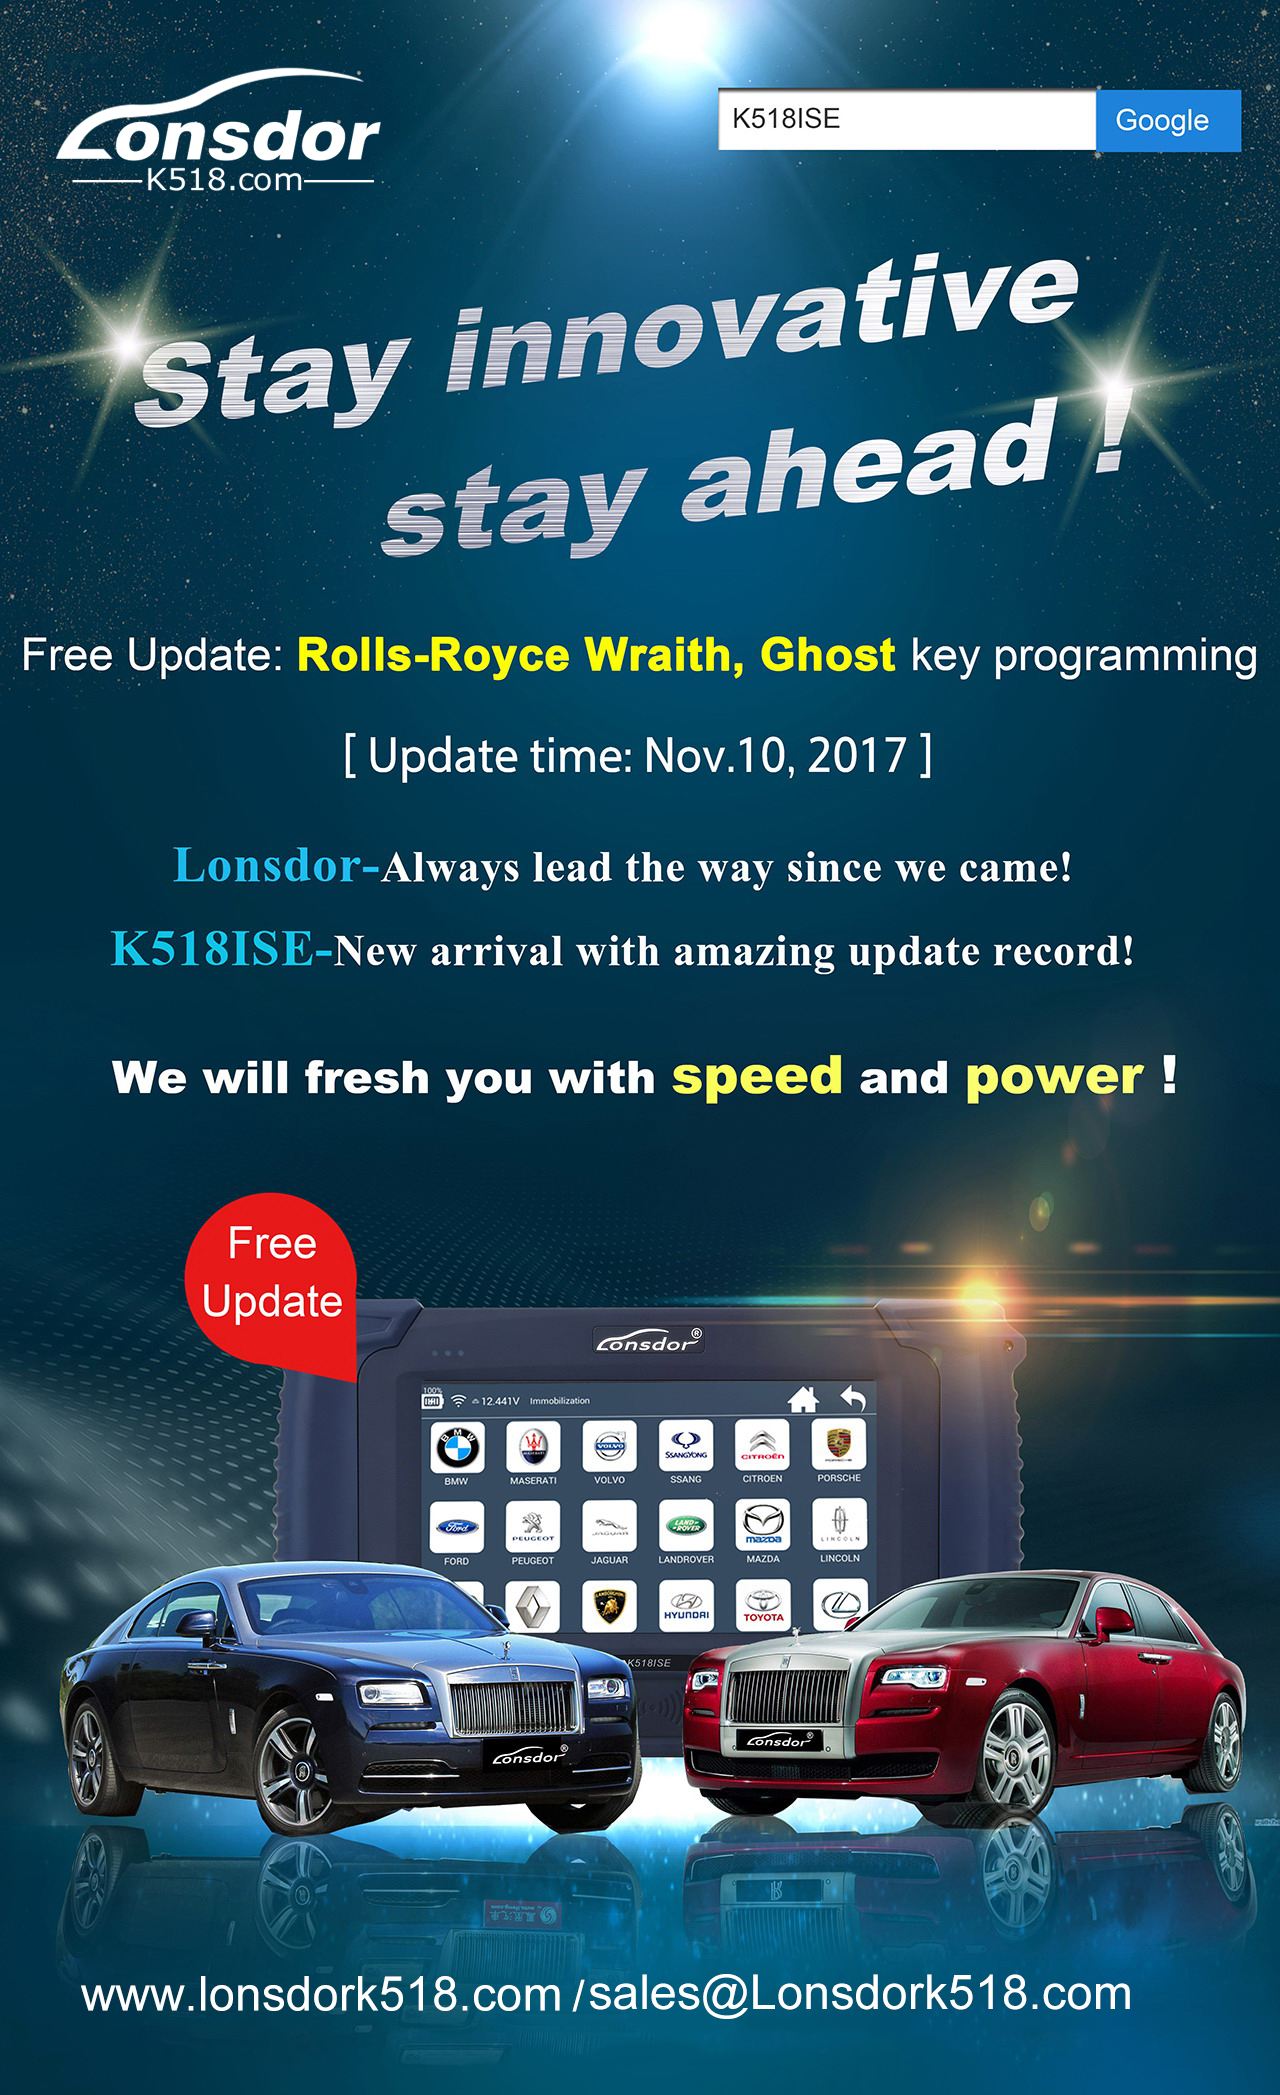 Free Update for rolls-royce wraith